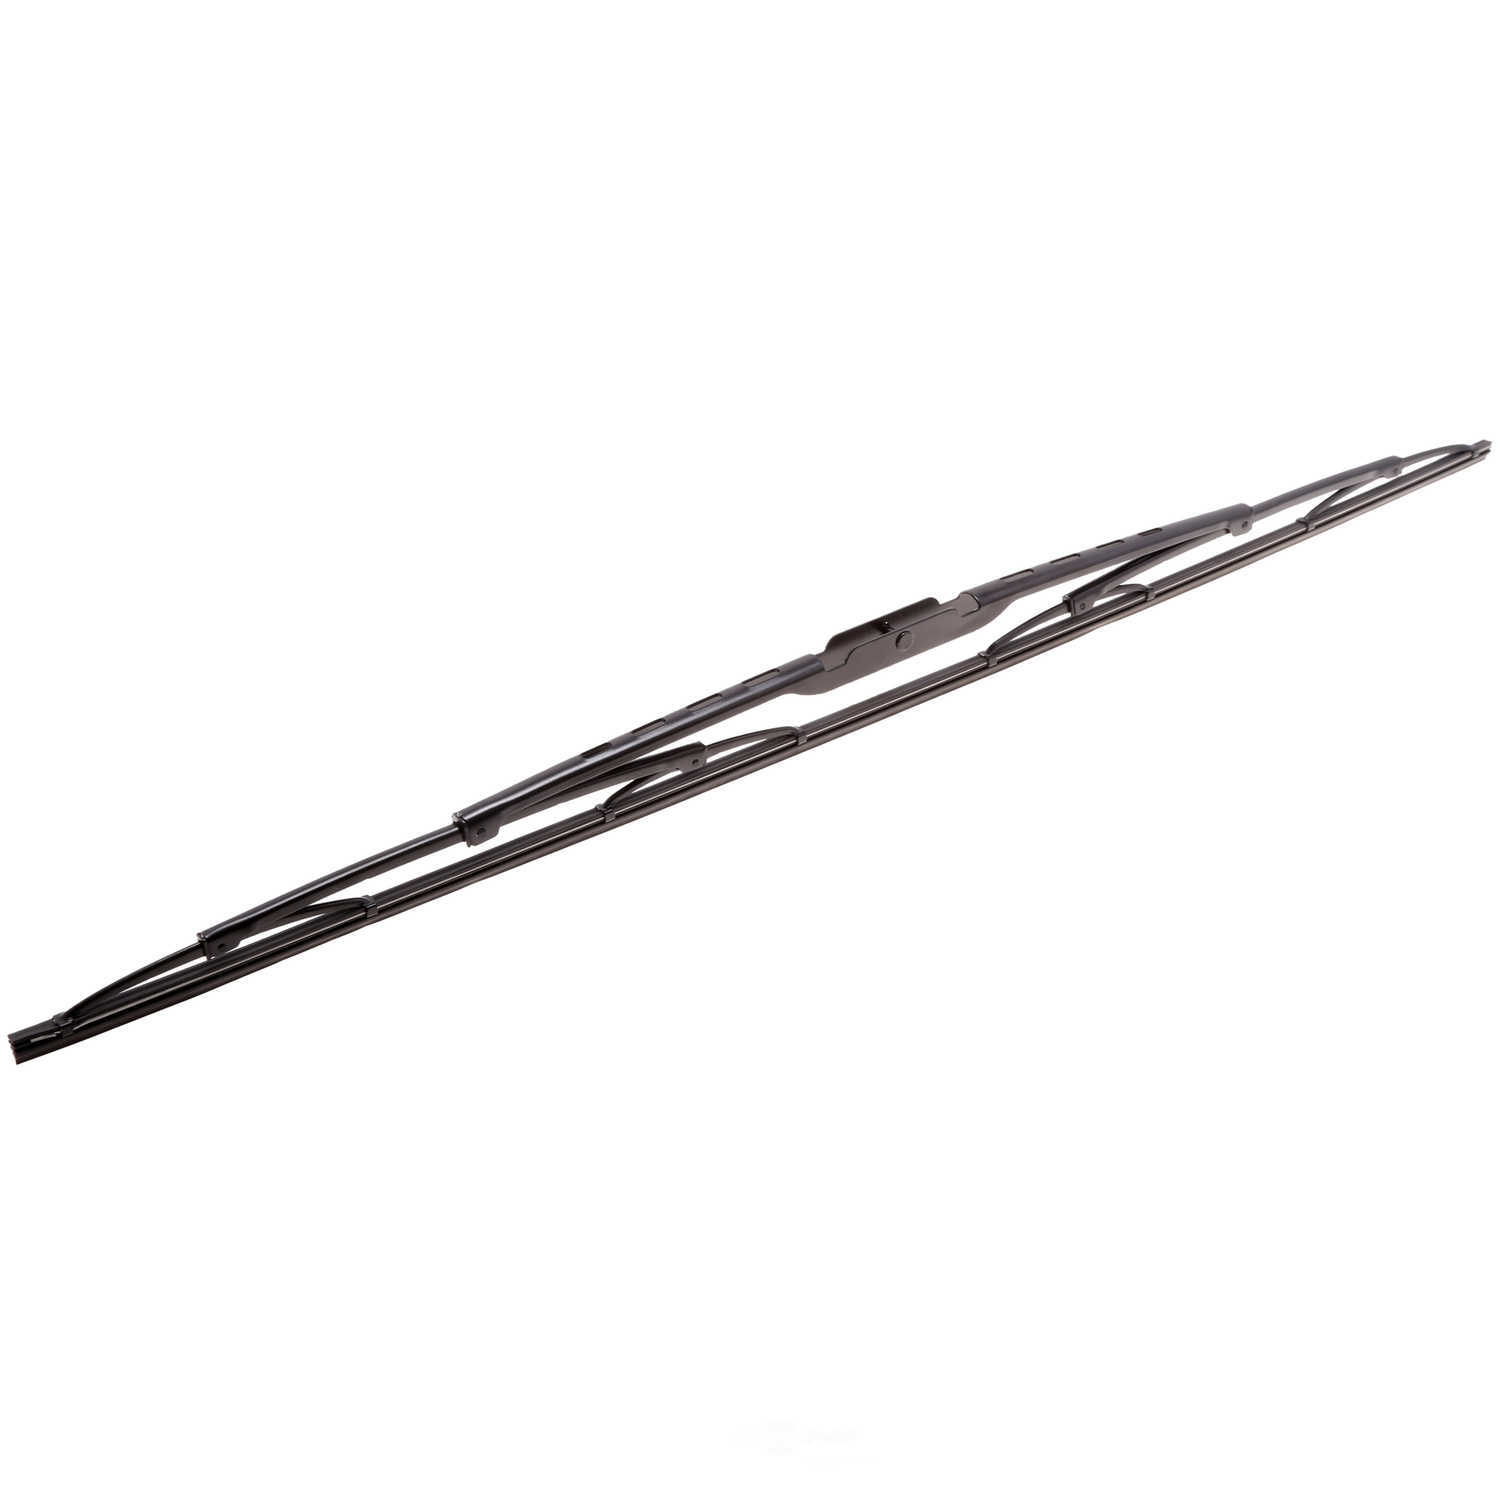 ANCO WIPER PRODUCTS - ANCO 31-Series Wiper Blade (Front Left) - ANC 31-28